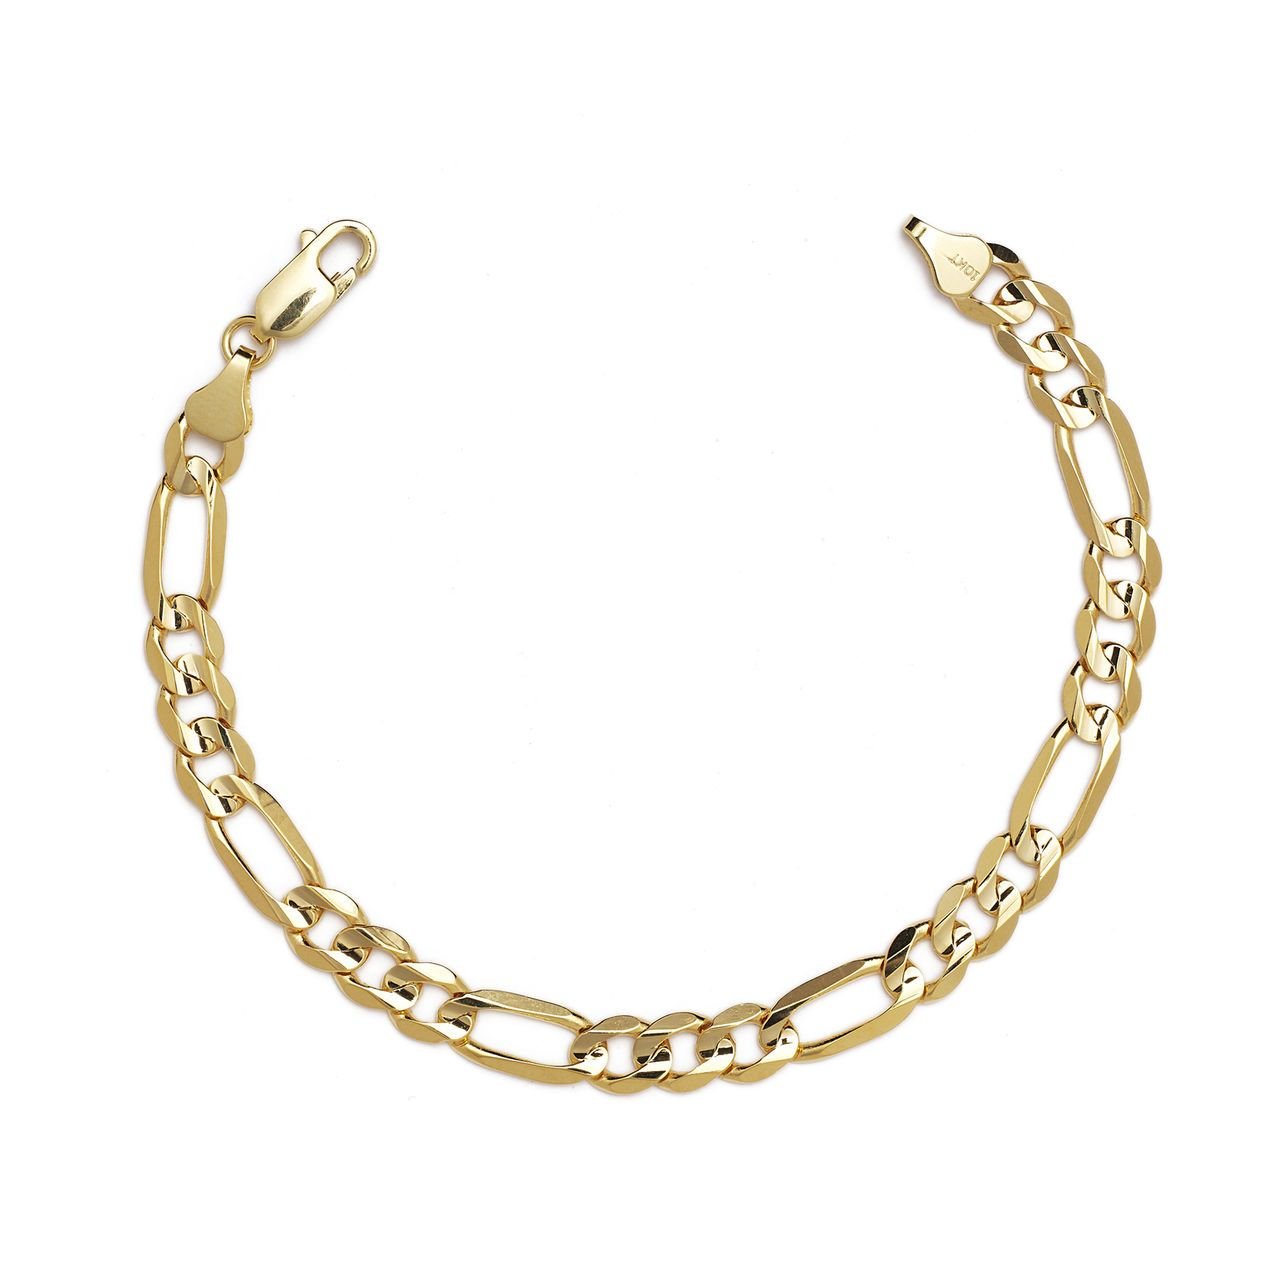 10k Yellow Gold Figaro Chain Bracelet with Concave Look, 0.44 Inch (11.2mm)